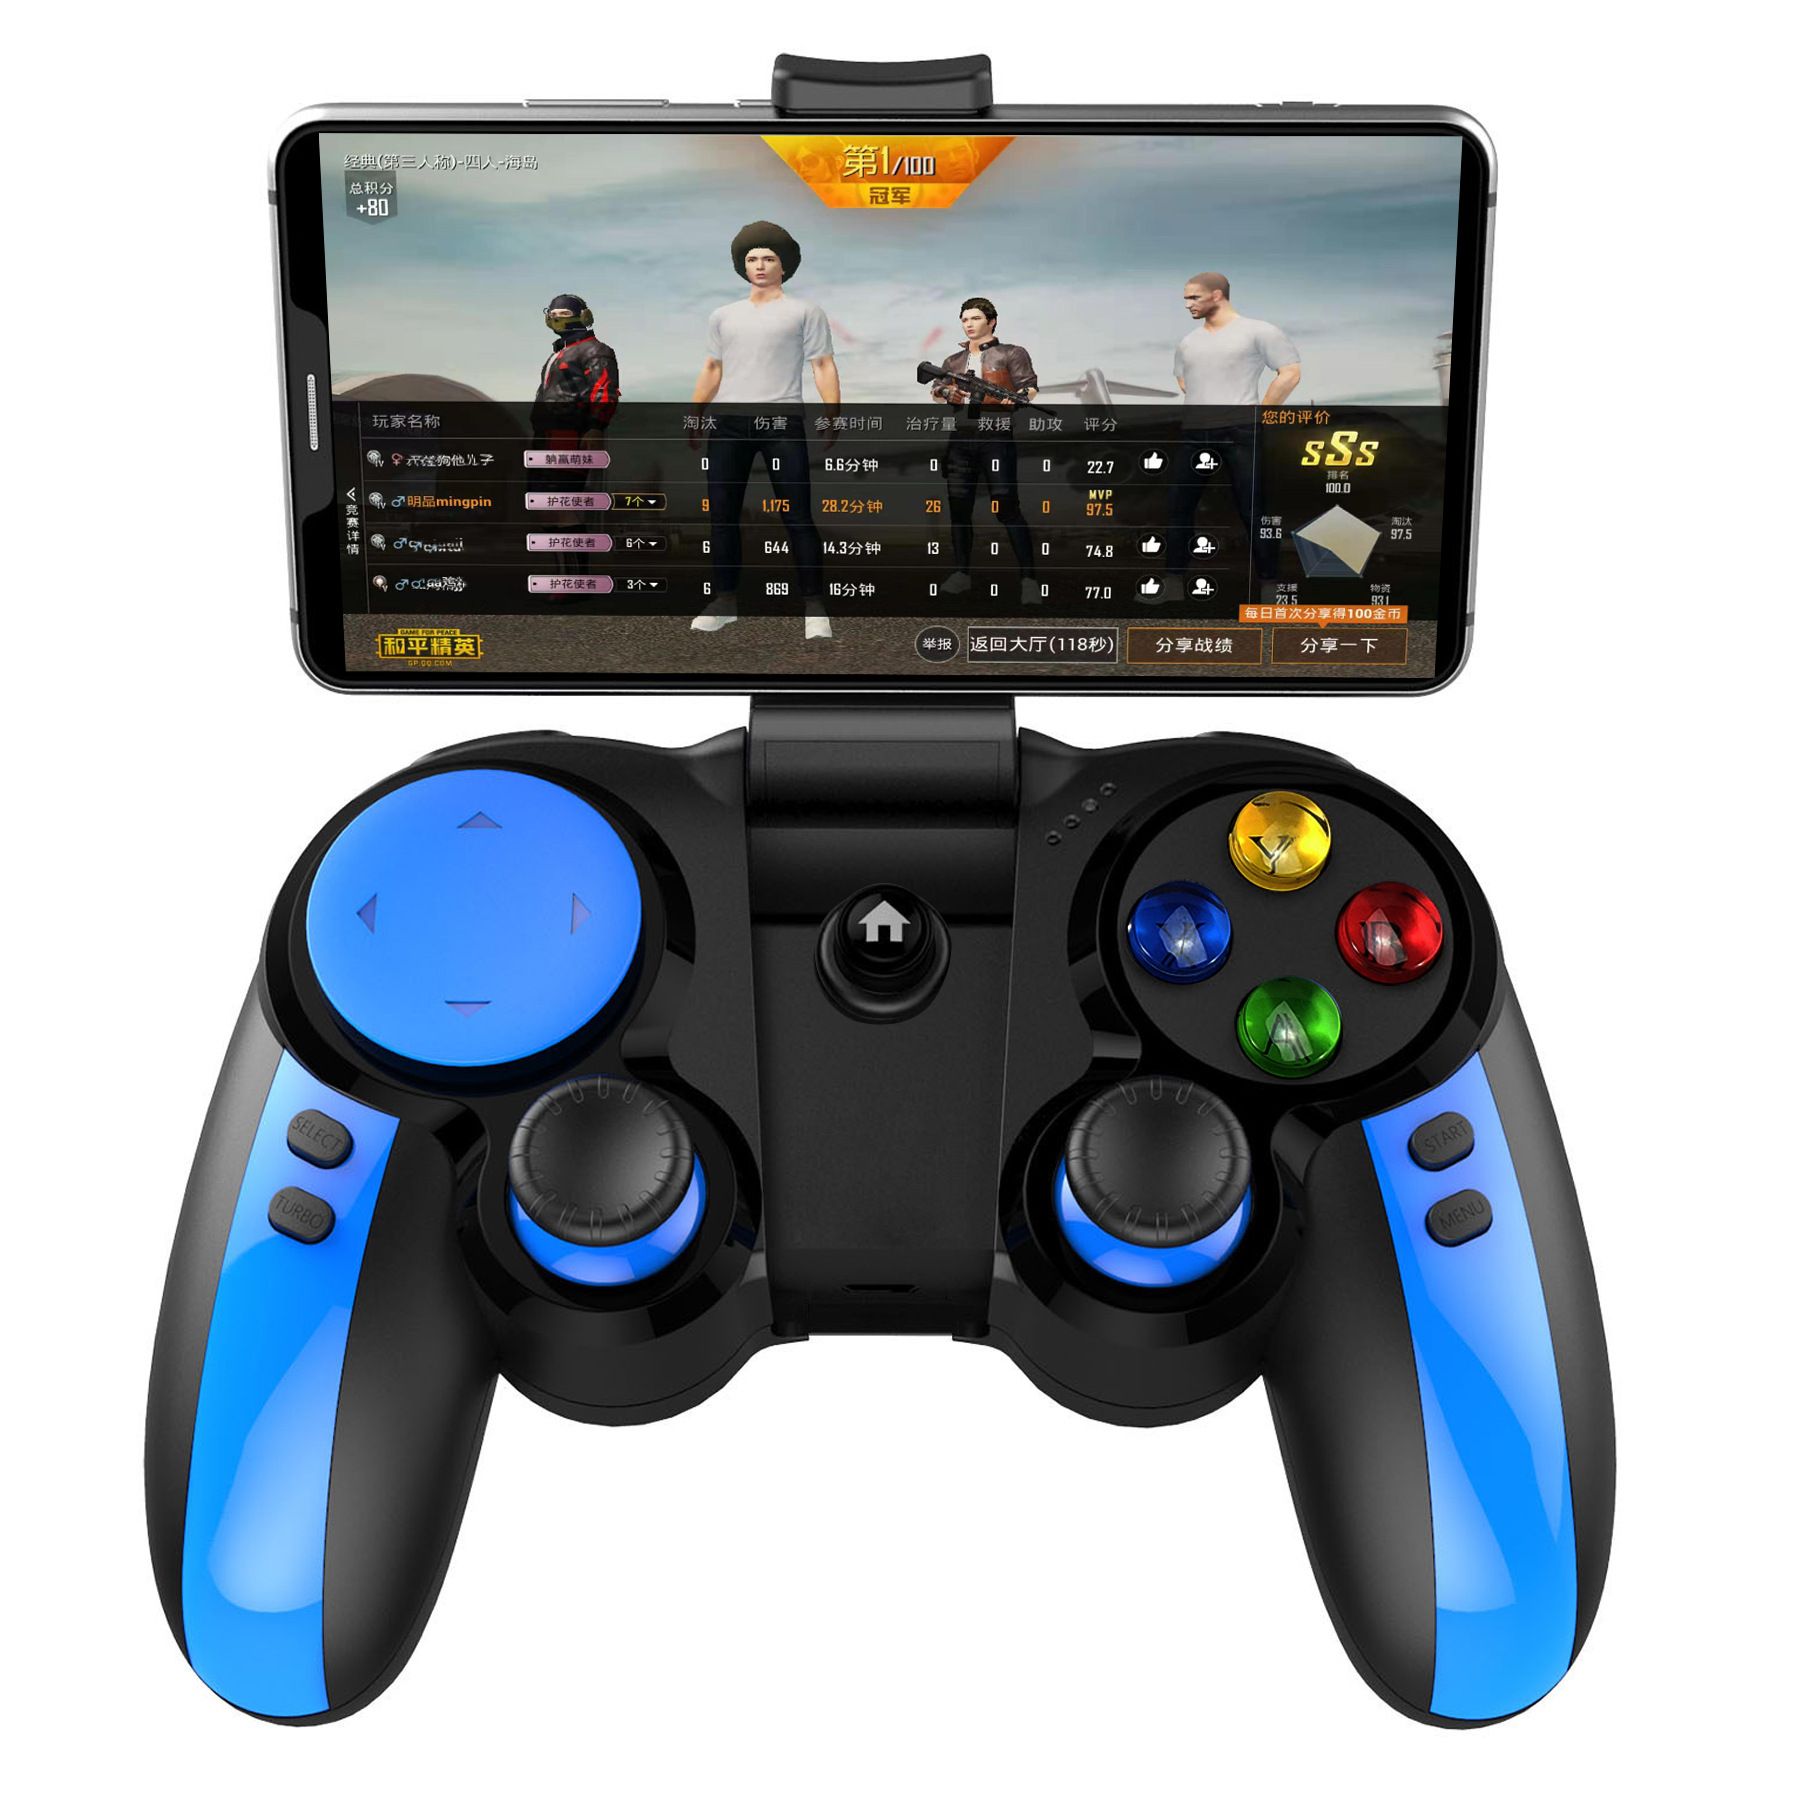 Geschikt smeren niet verwant C16 Bluetooth Wireless Gamepad Android IOS Phone Game Console PC TV Box  Joystick VR Controller Mobile Joypad For GB CF Pubg Games From  Ellison910812, $13.07 | DHgate.Com